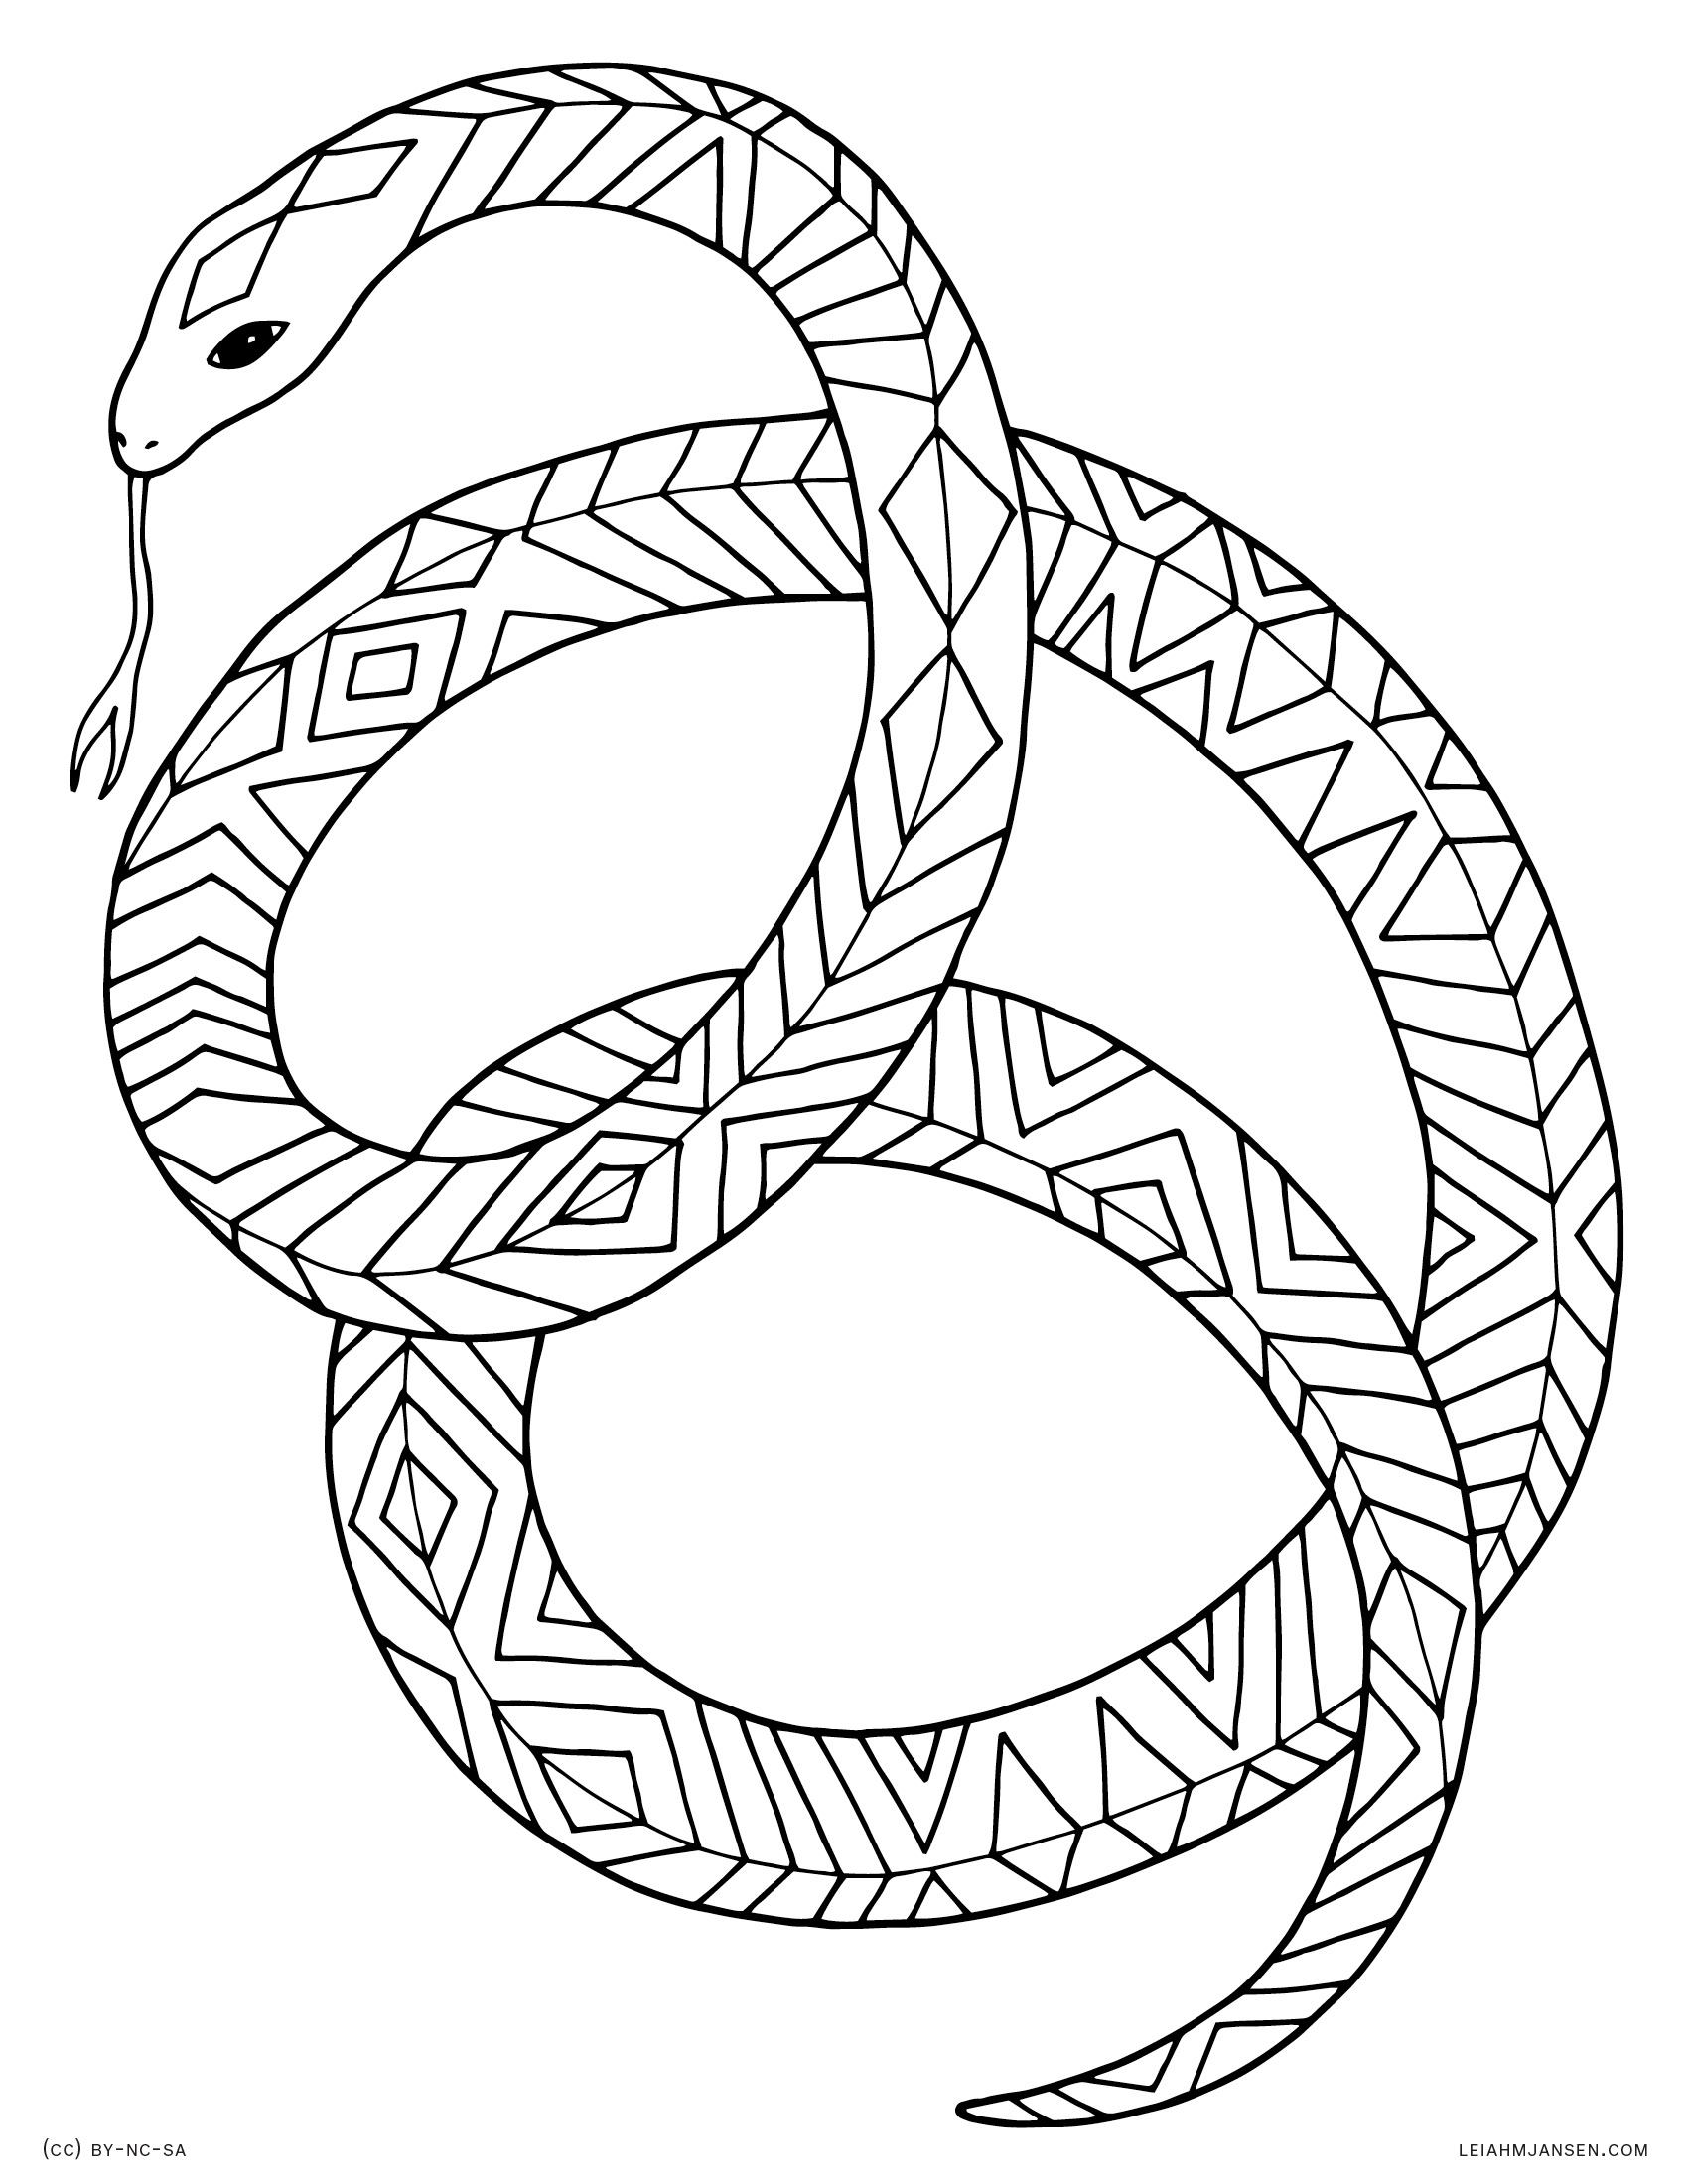 snake colouring pages 9 snake coloring pages jpg psd free premium templates colouring snake pages 